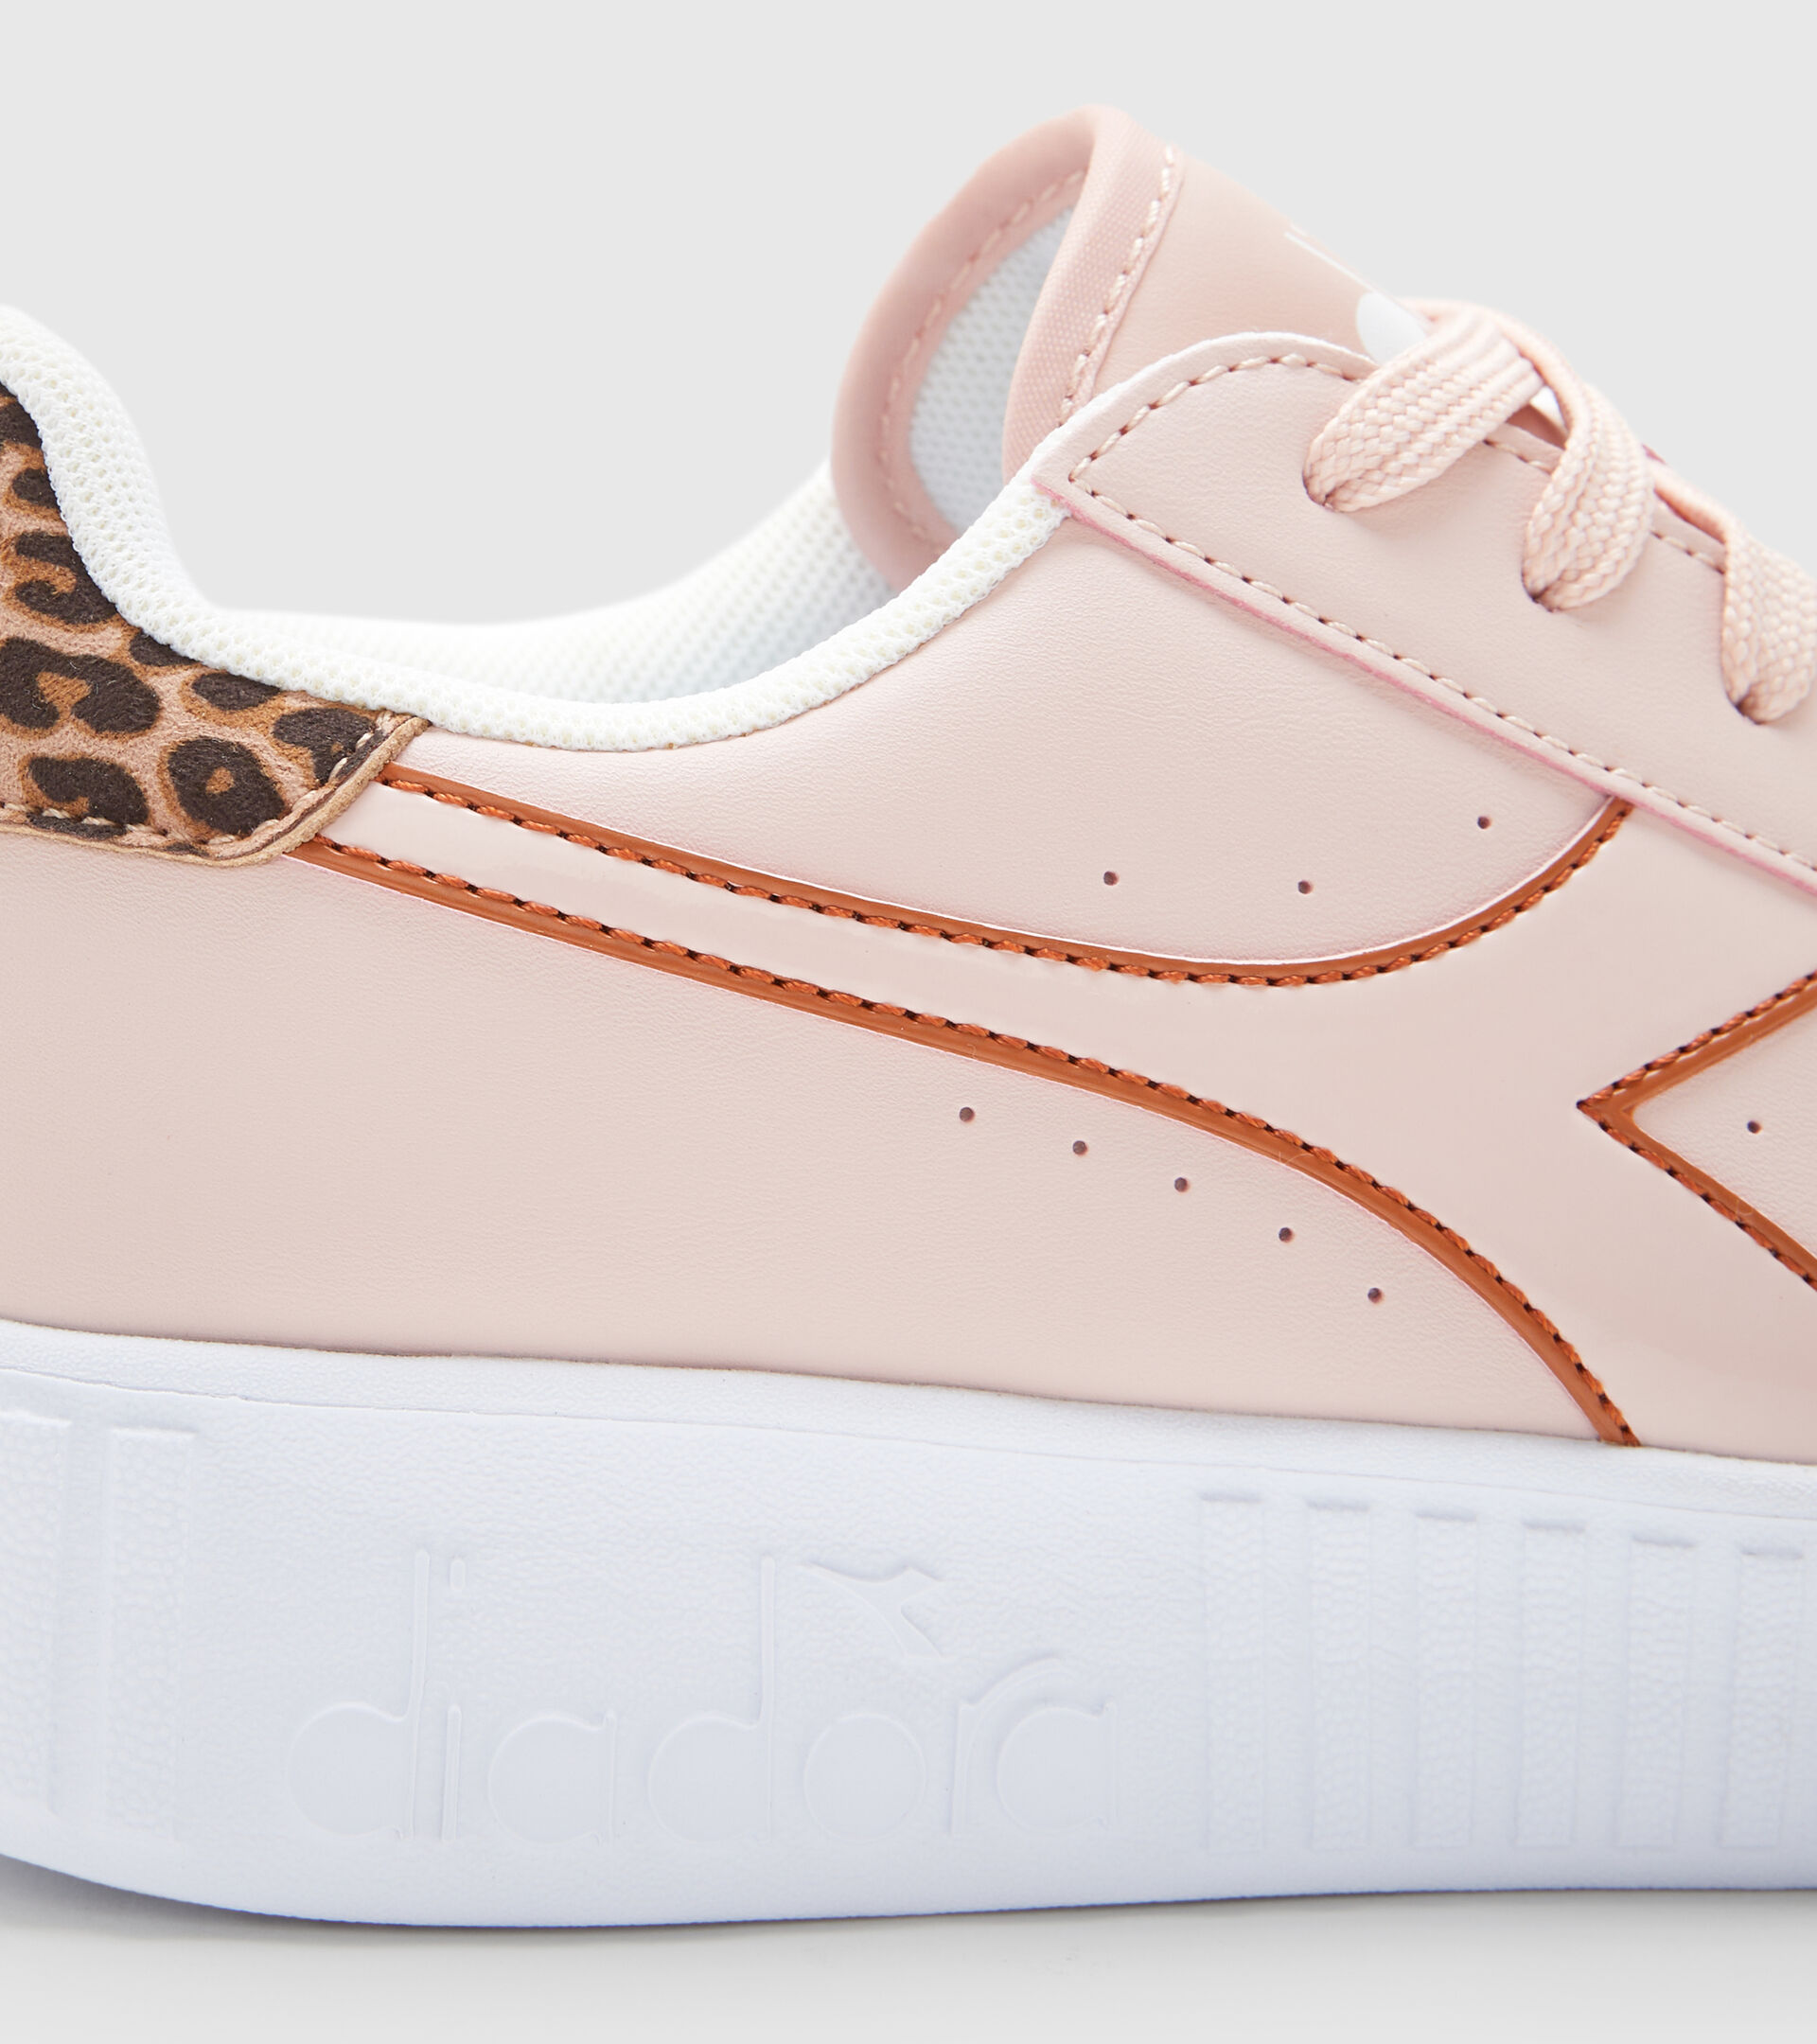 Sports shoes - Youth 8-16 years GAME STEP P LEOPARD GS PEACH PINK  (50185) - Diadora